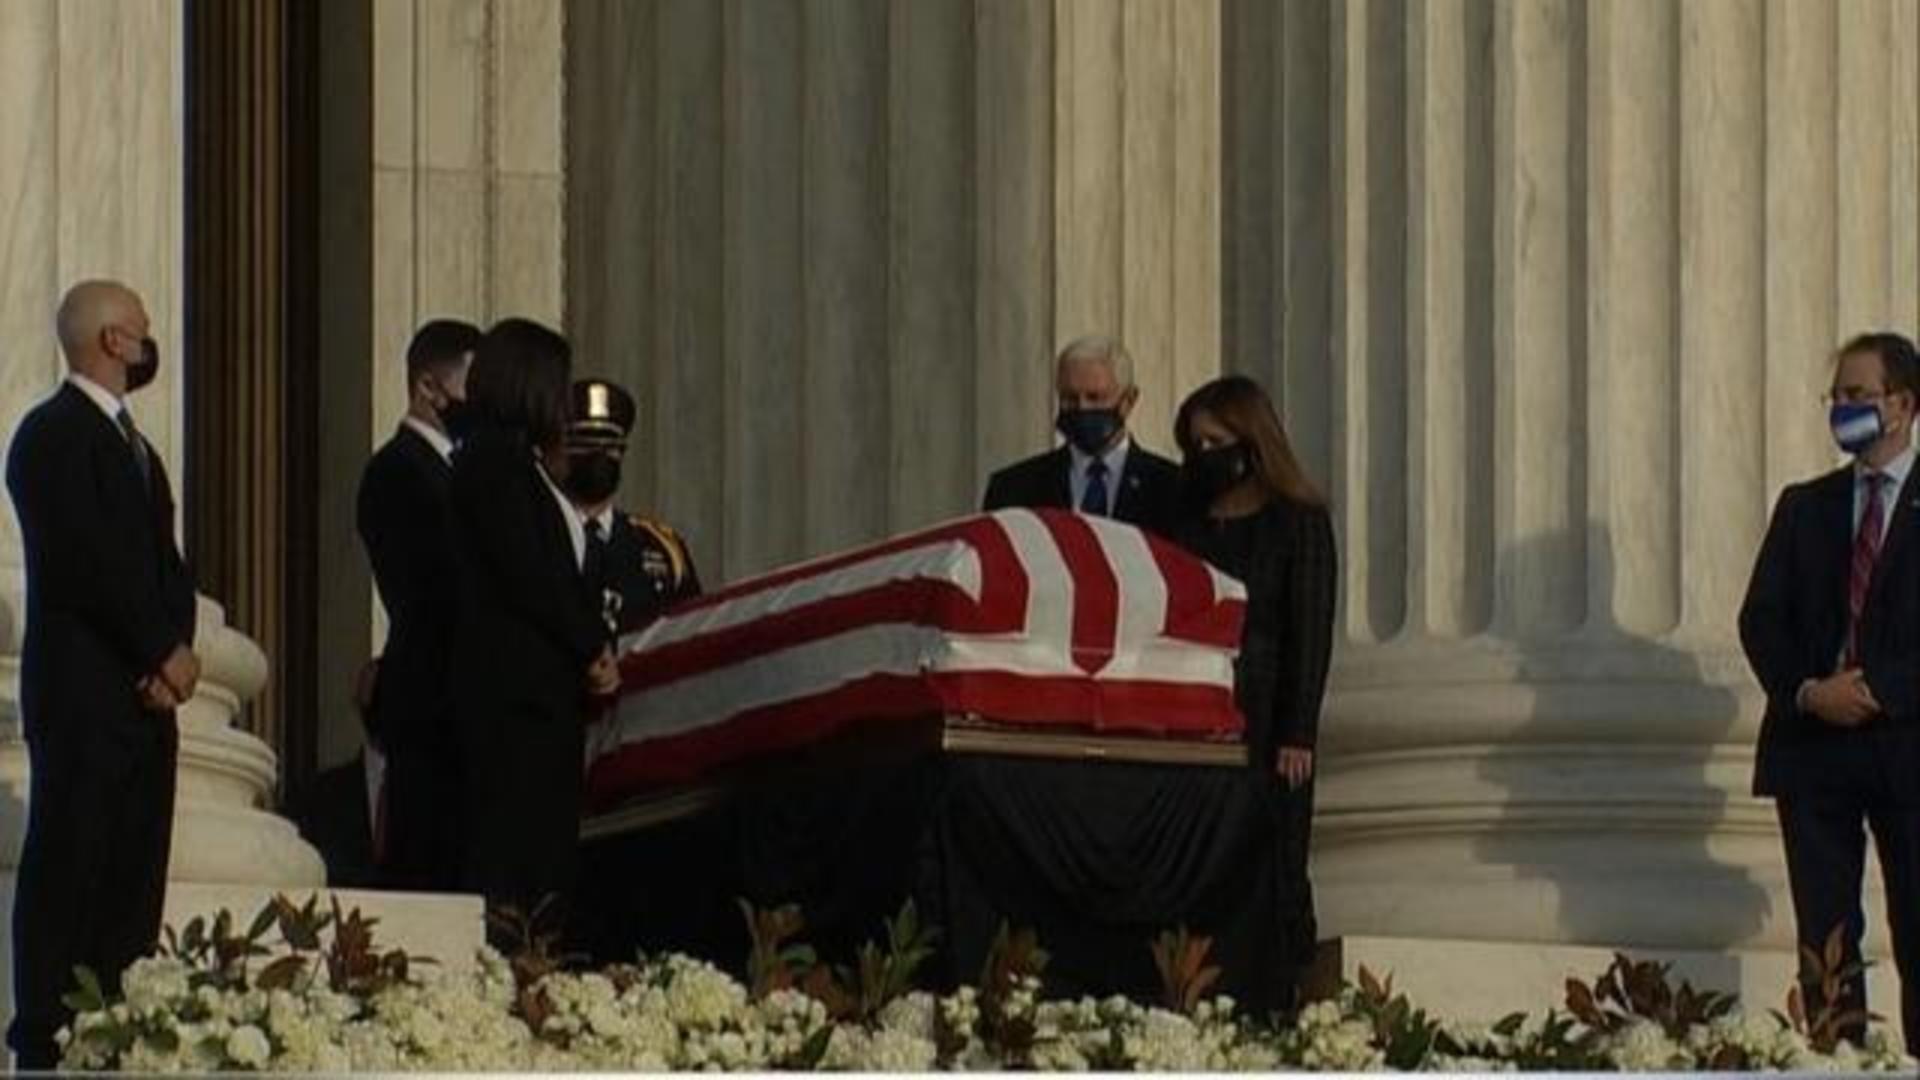 Thousands line up to see Justice Ruth Bader Ginsburg lie in repose outside Supreme Court